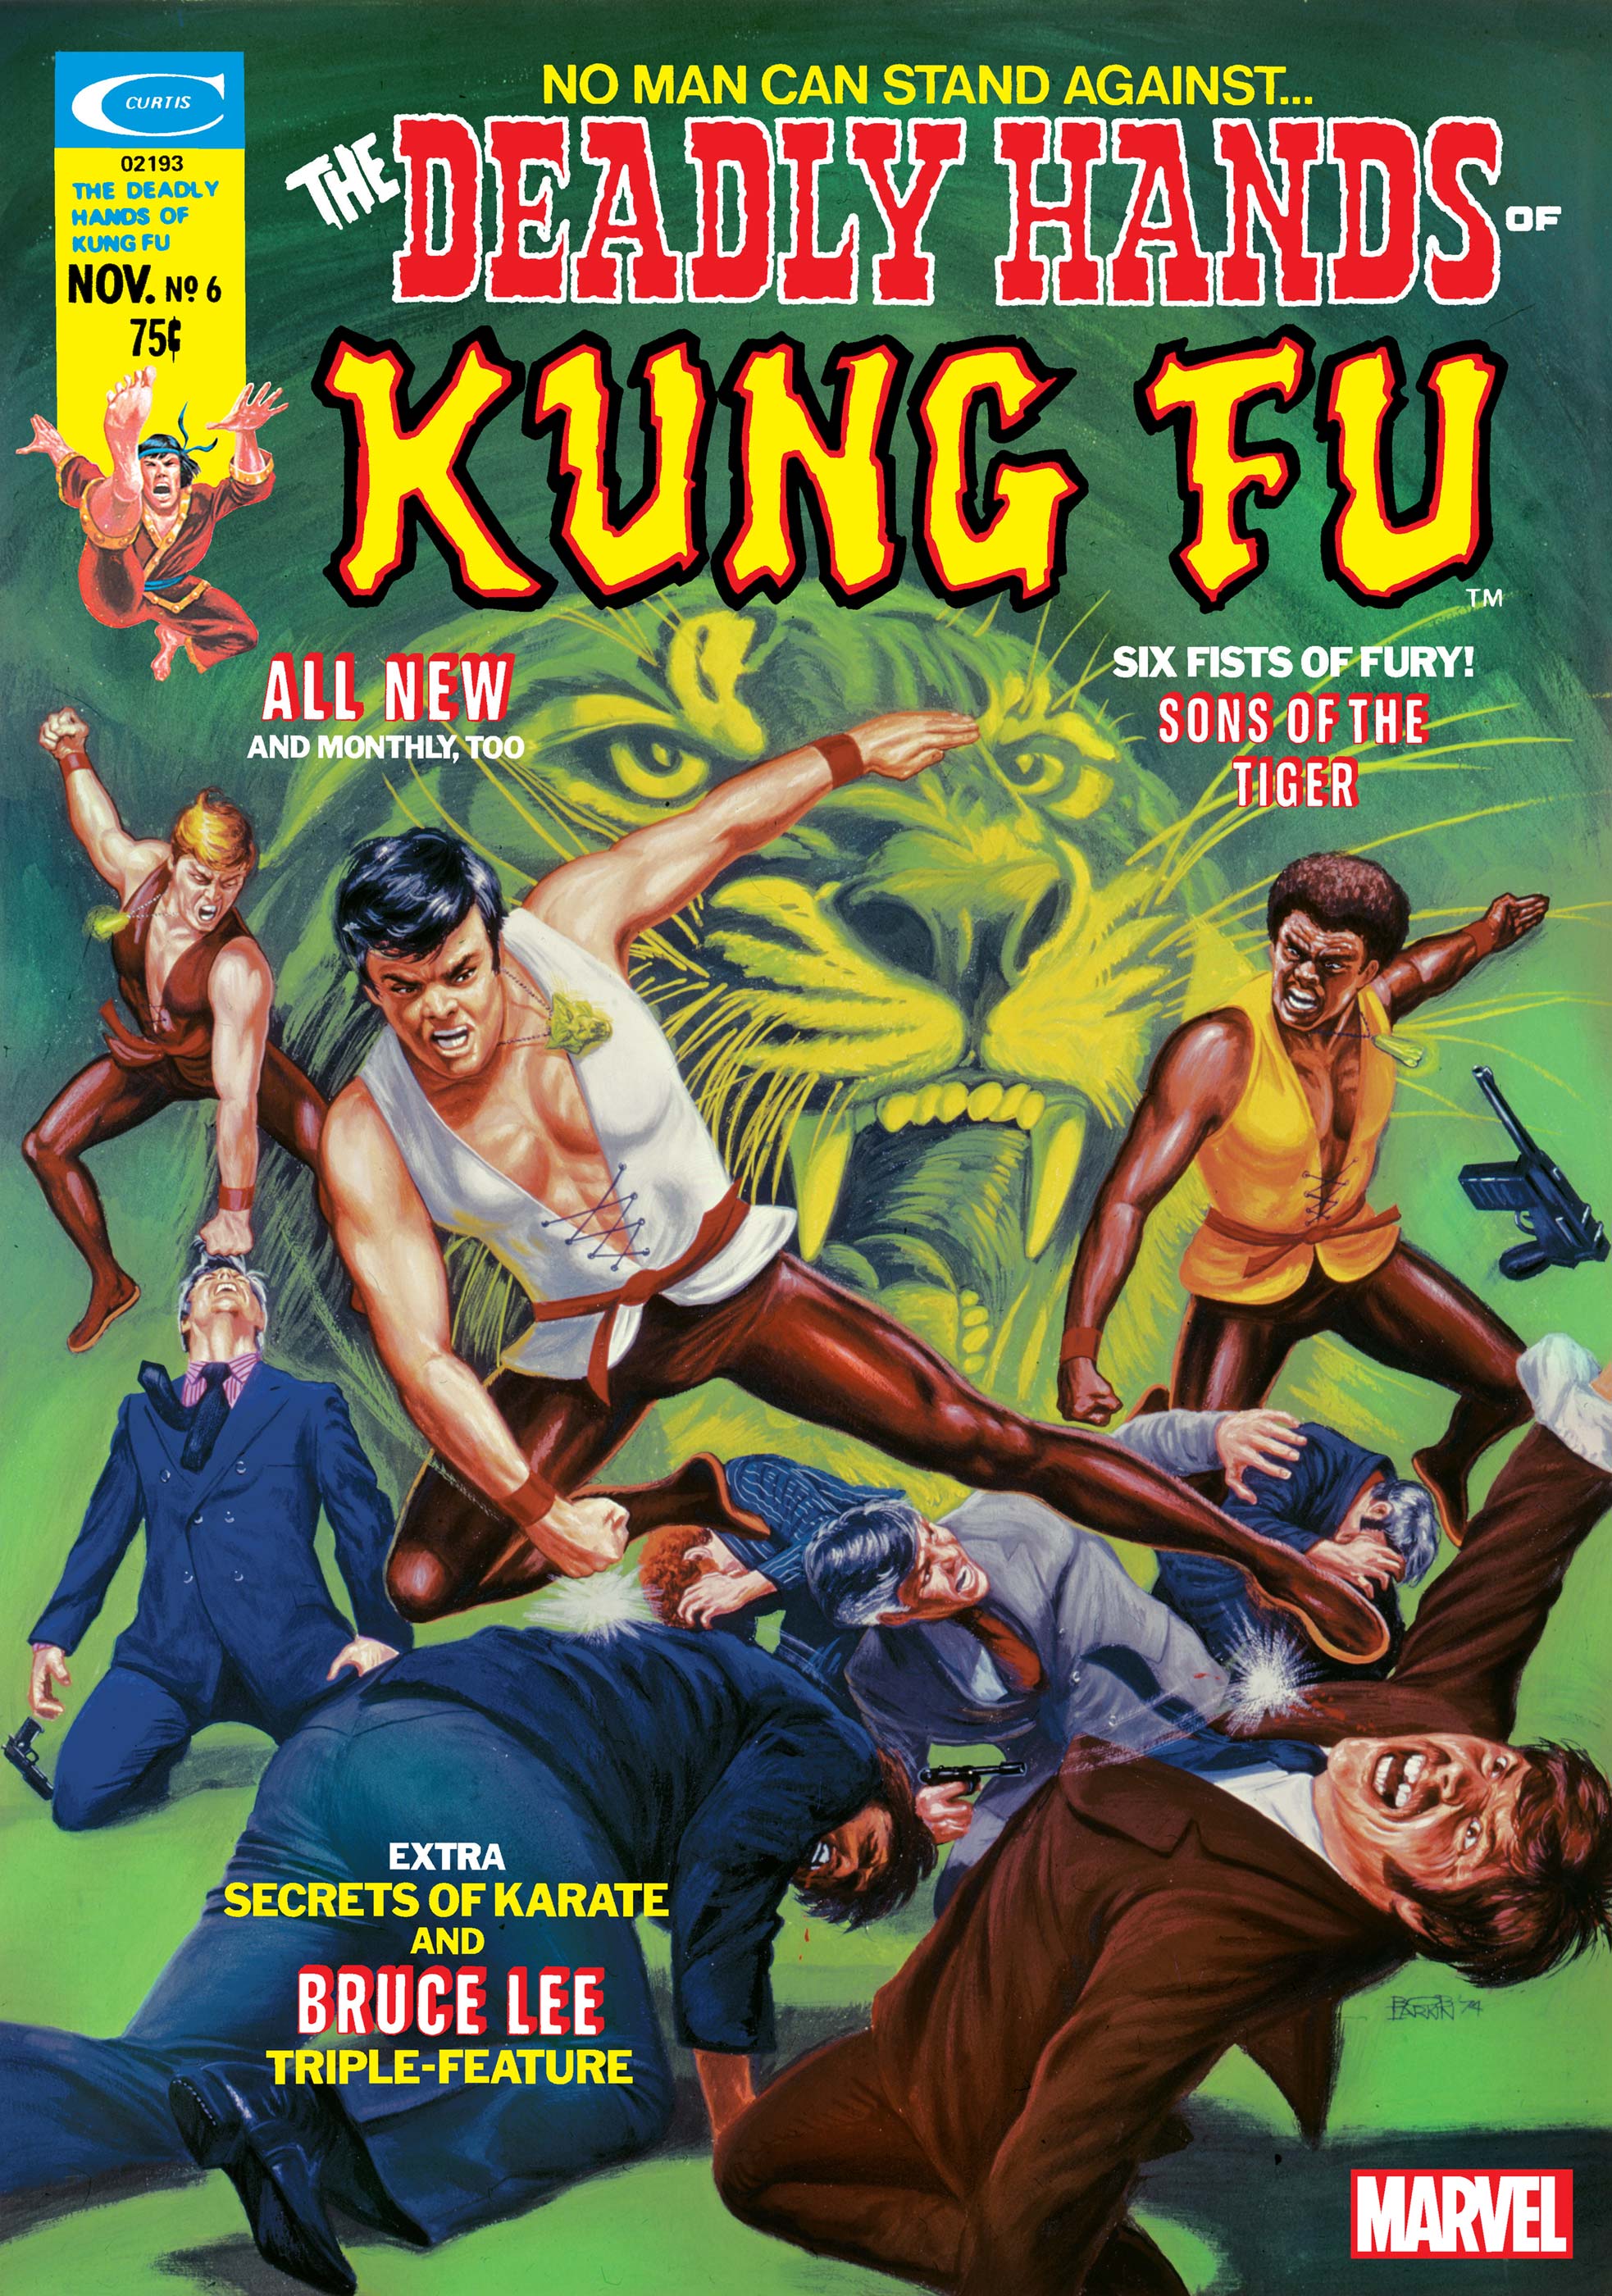 Deadly Hands of Kung Fu (1974) #6